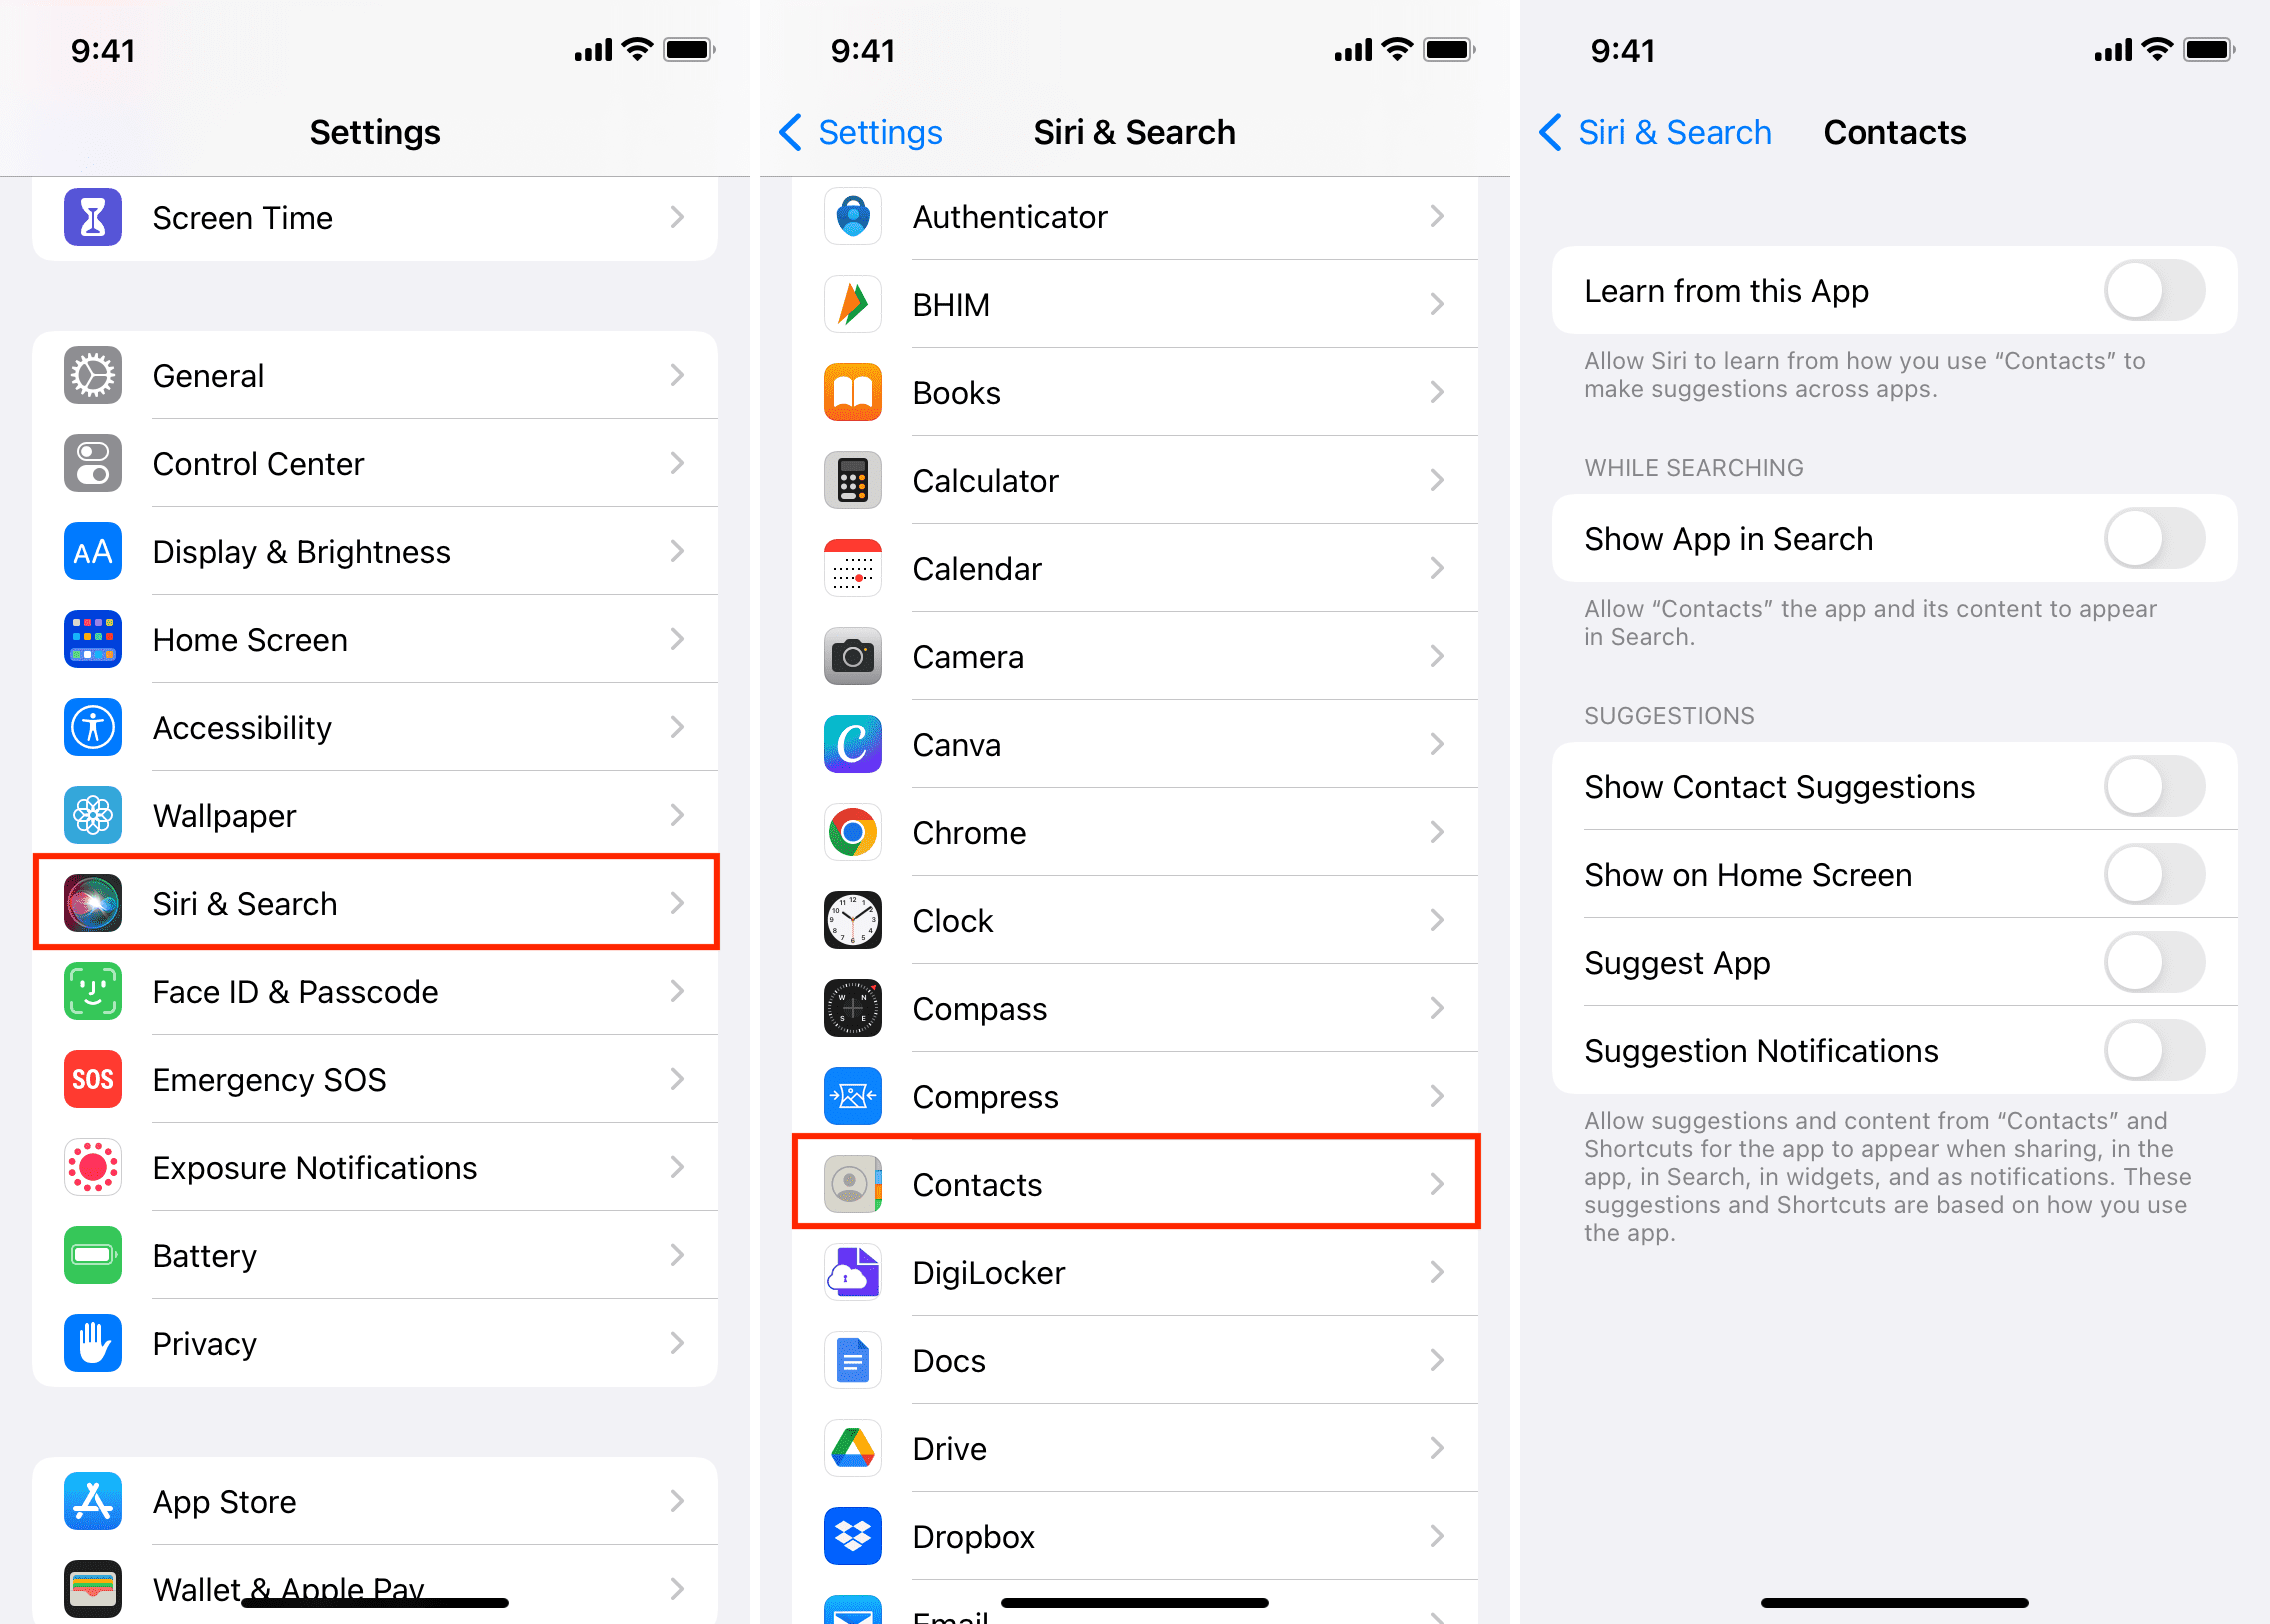 Turn off Siri and Search for iPhone Contacts